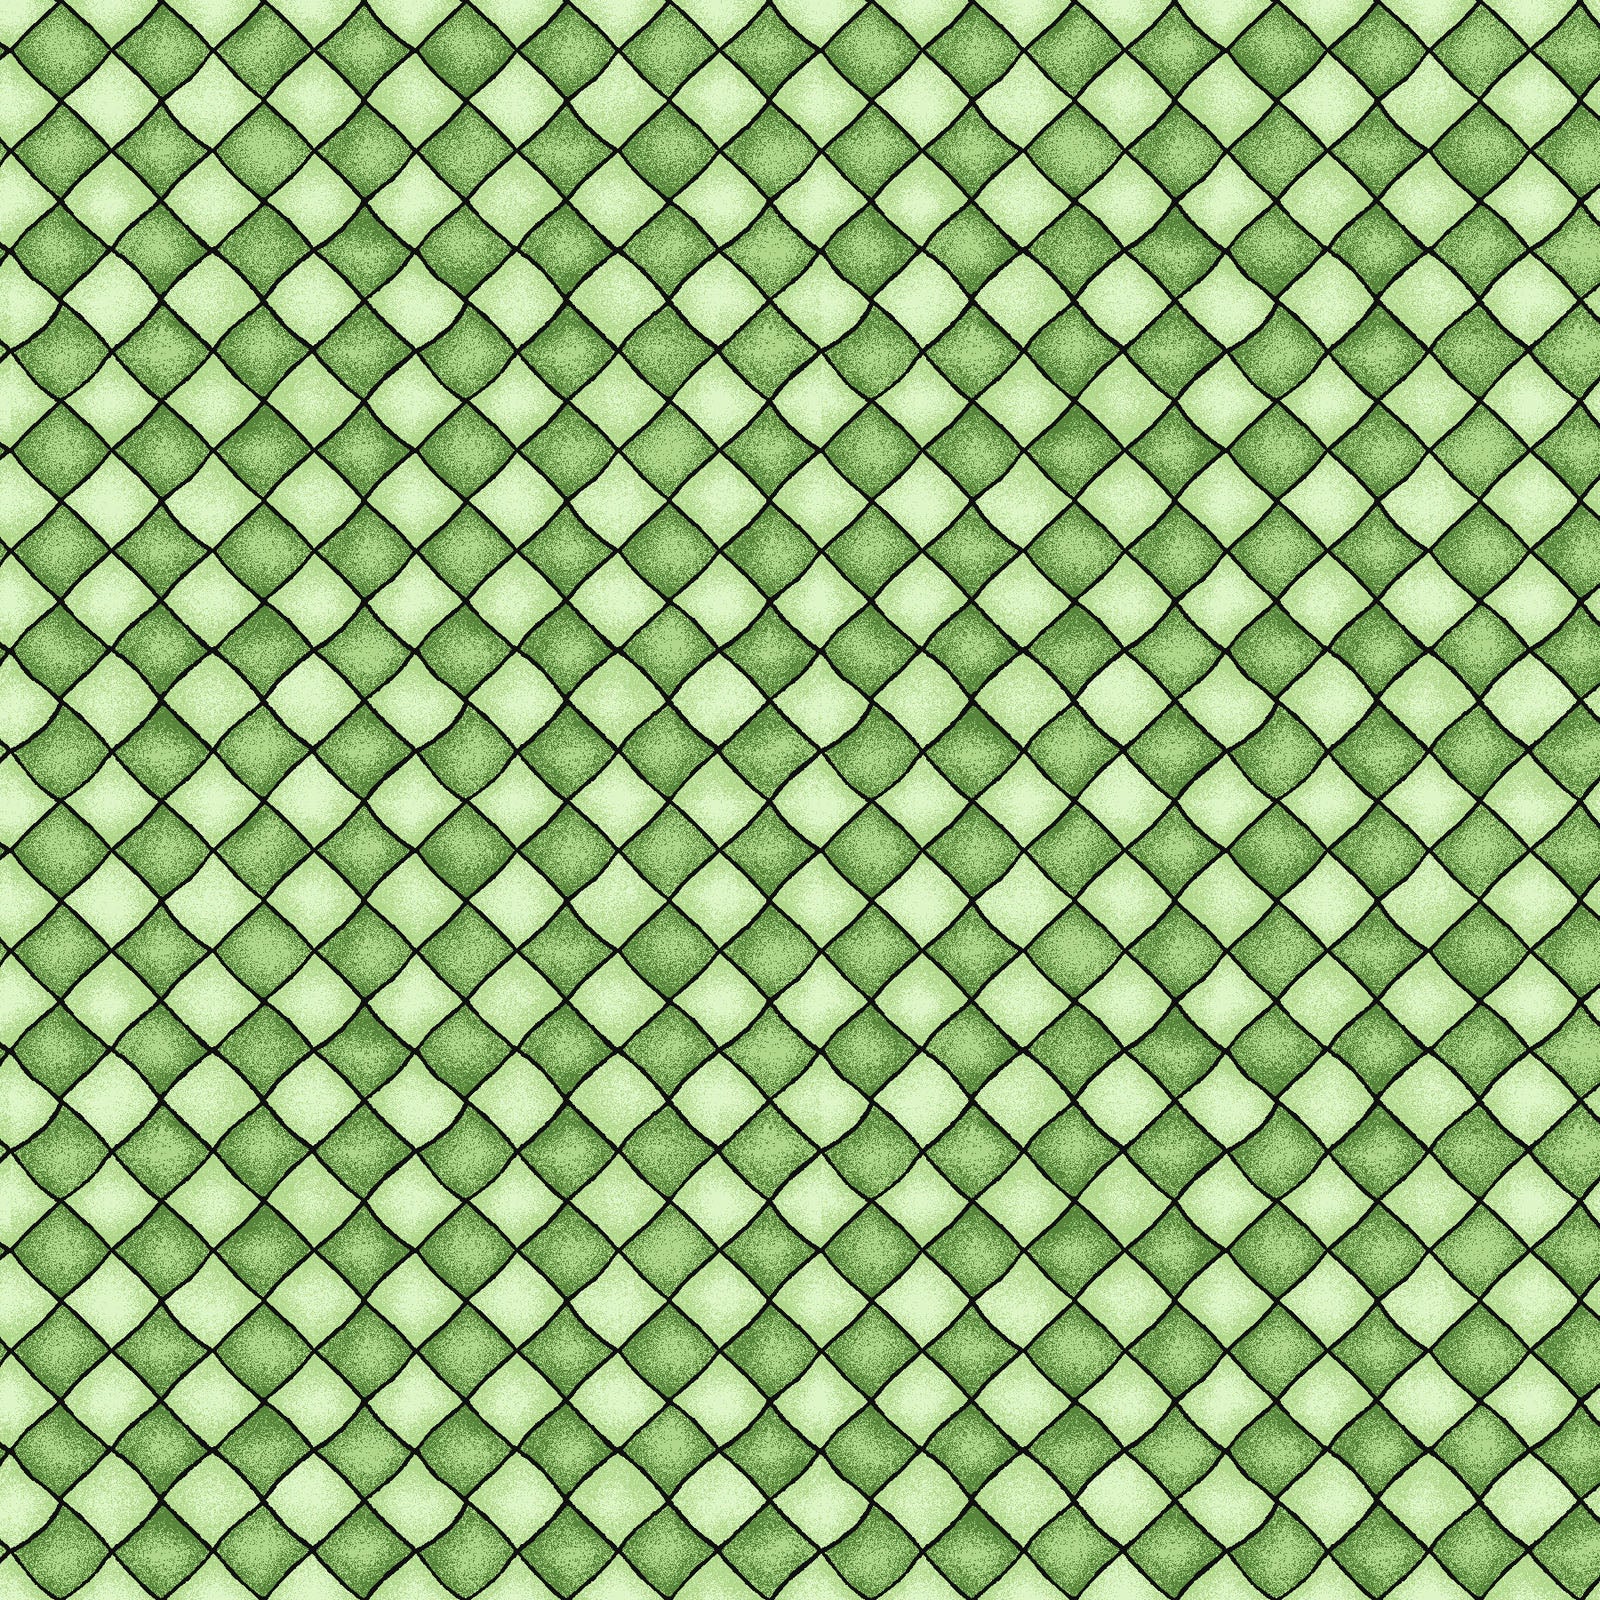 Happiness is Homemade Cotton Print - Checkers on Green